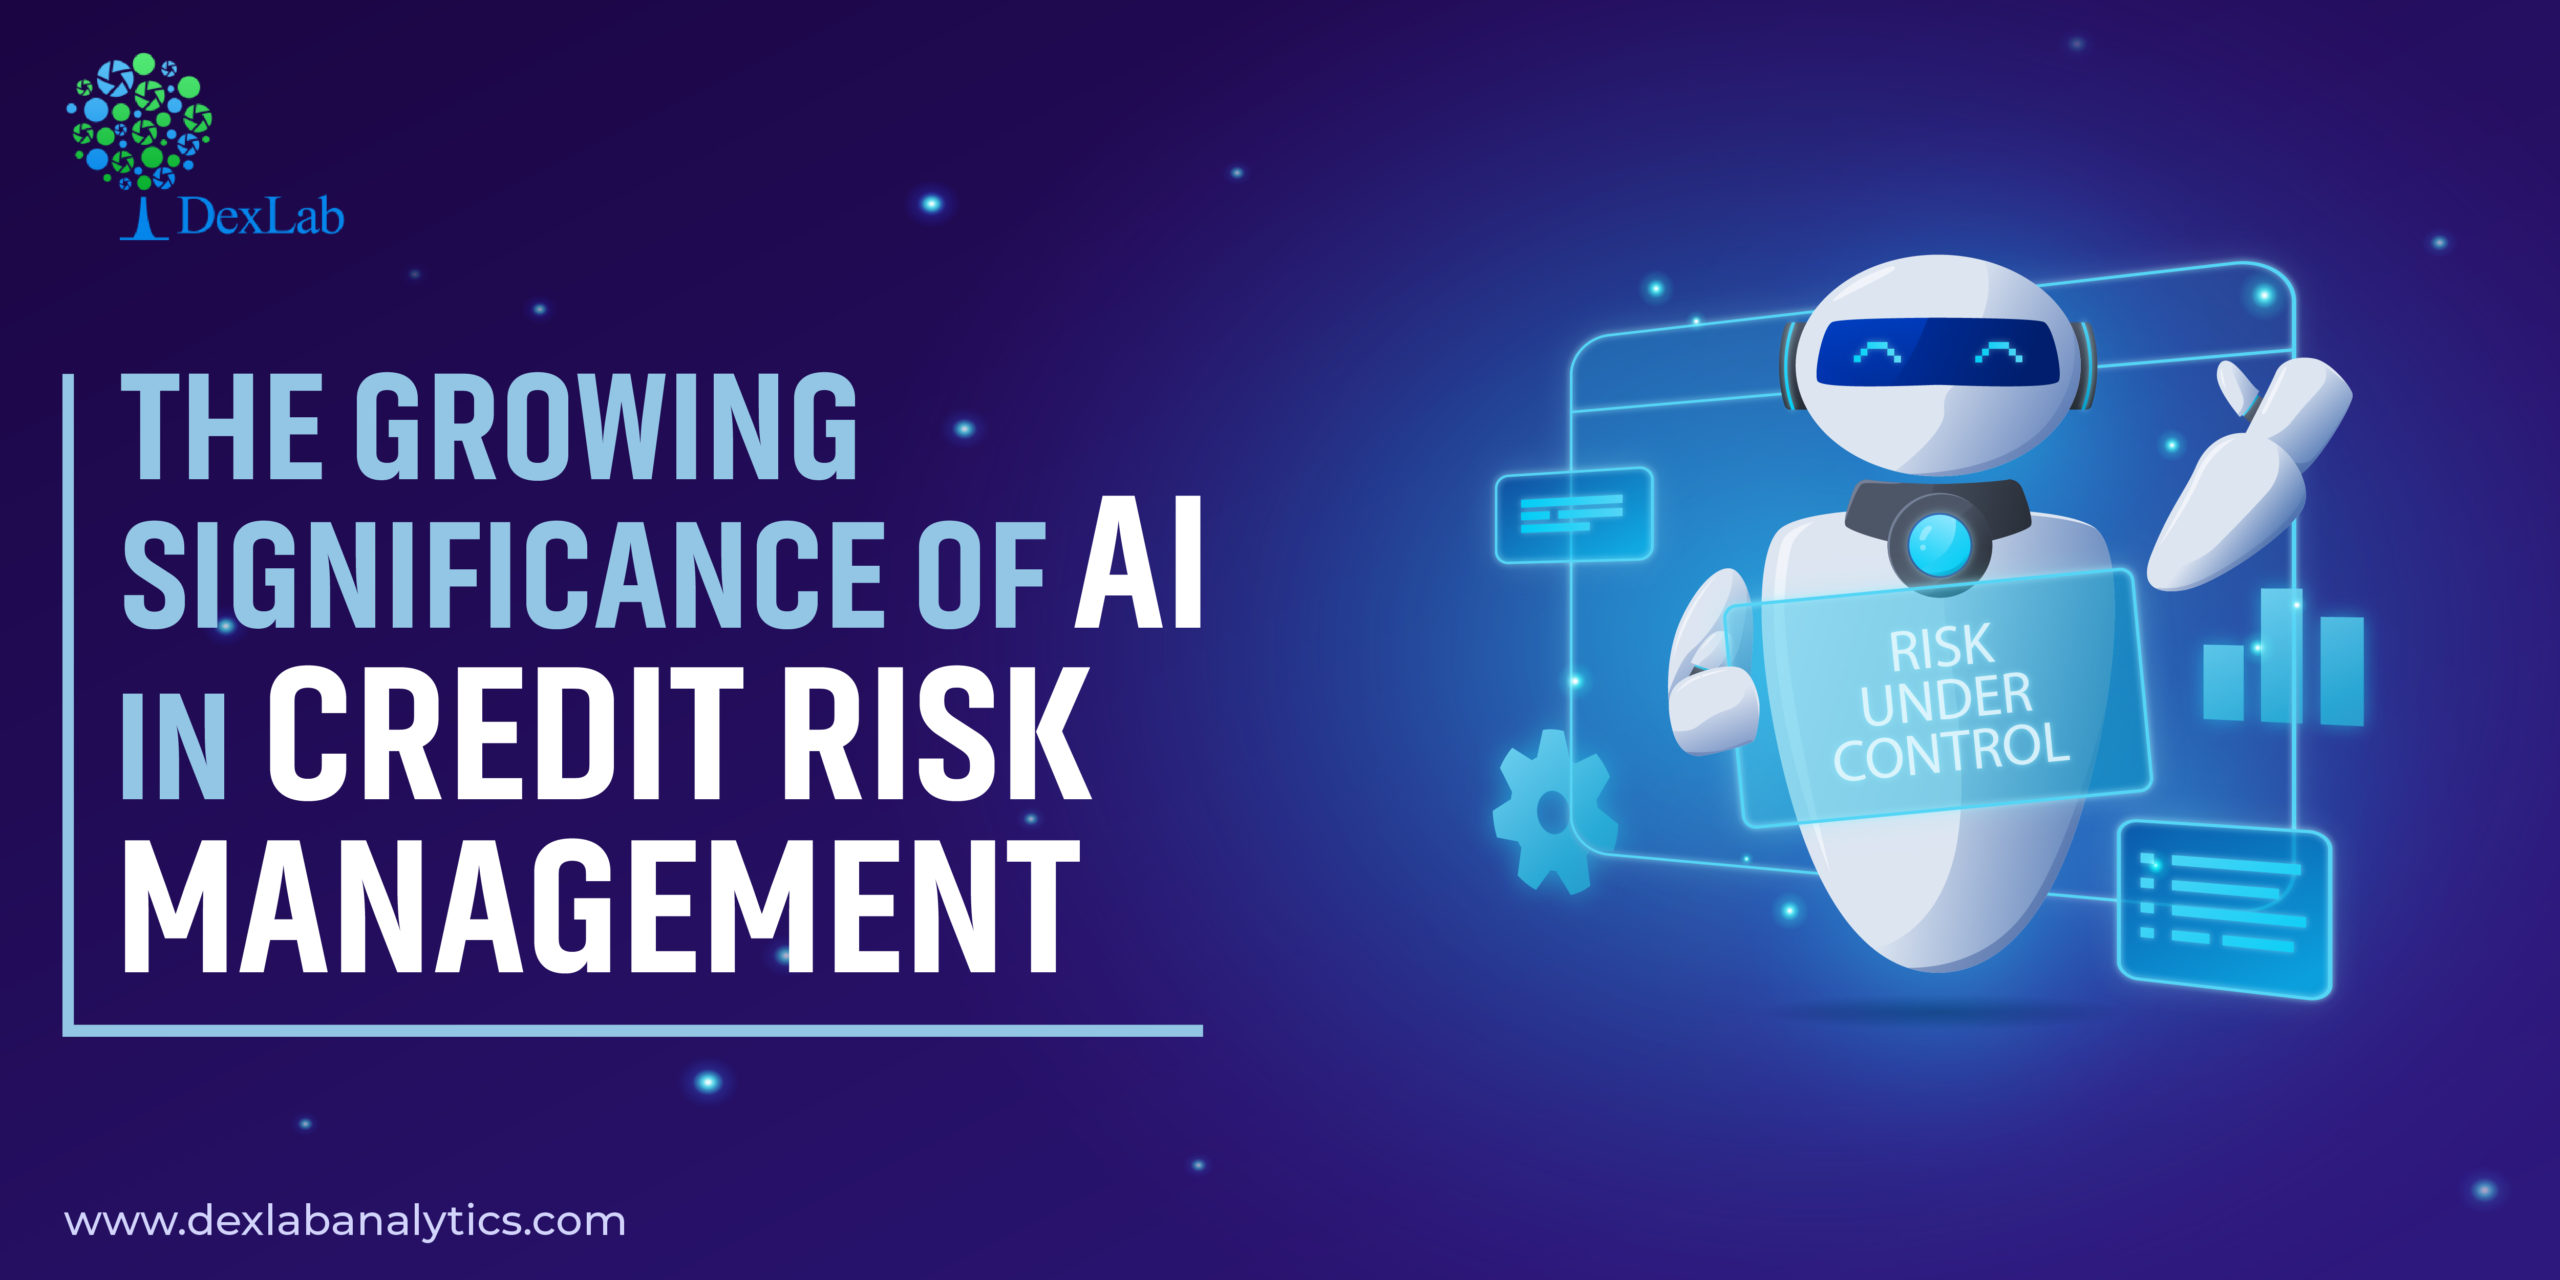 The Growing Significance of AI in Credit Risk Management